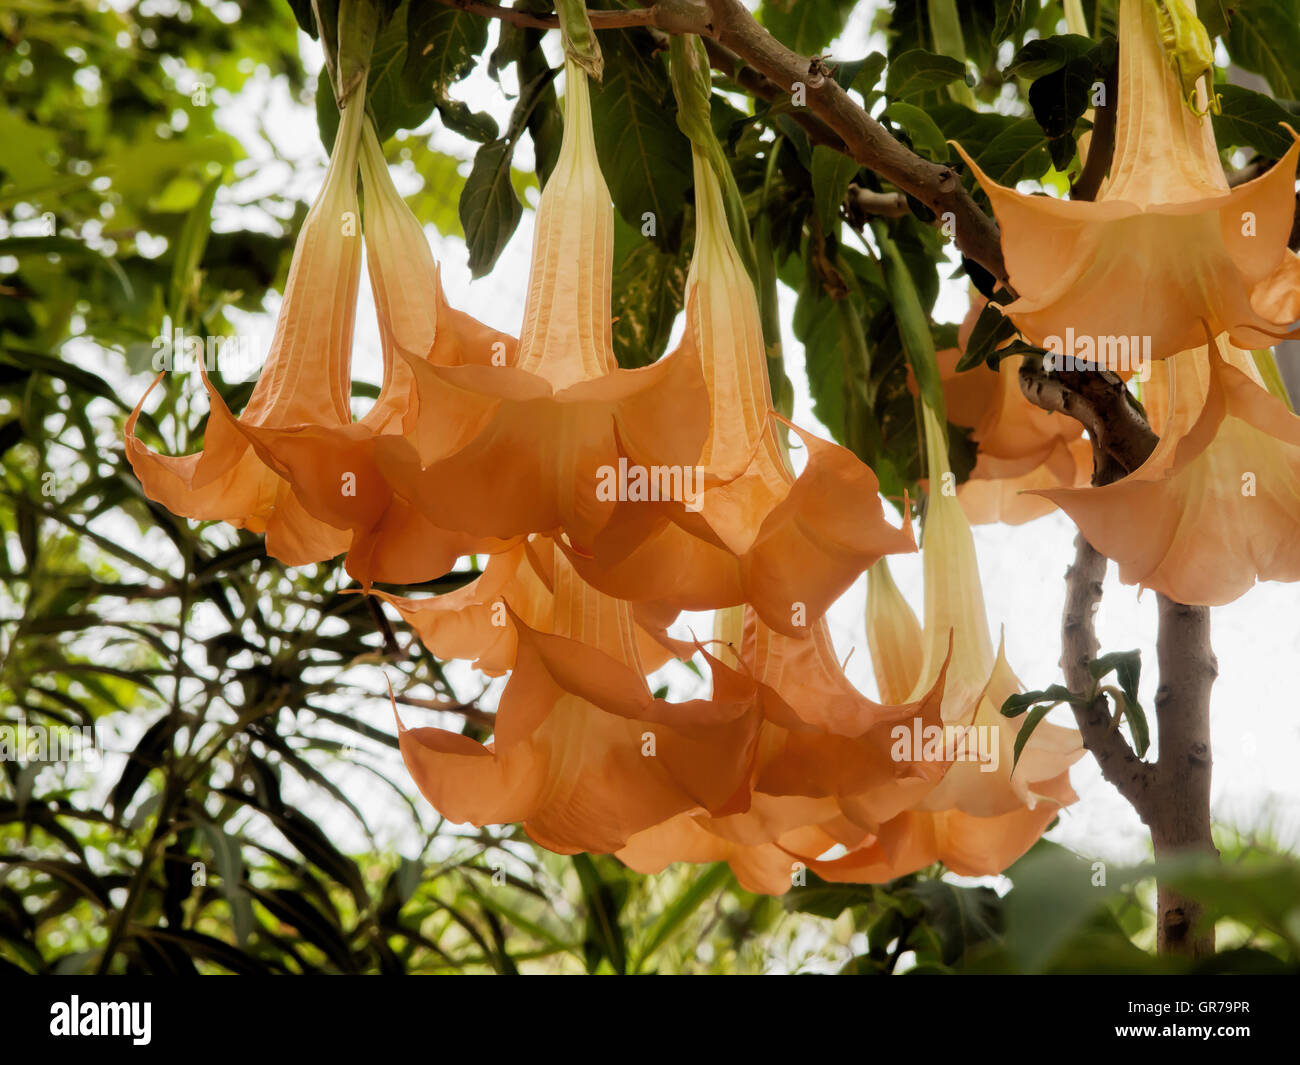 Blossom Of The Toxis Plant Angel S Trumpet Stock Photo